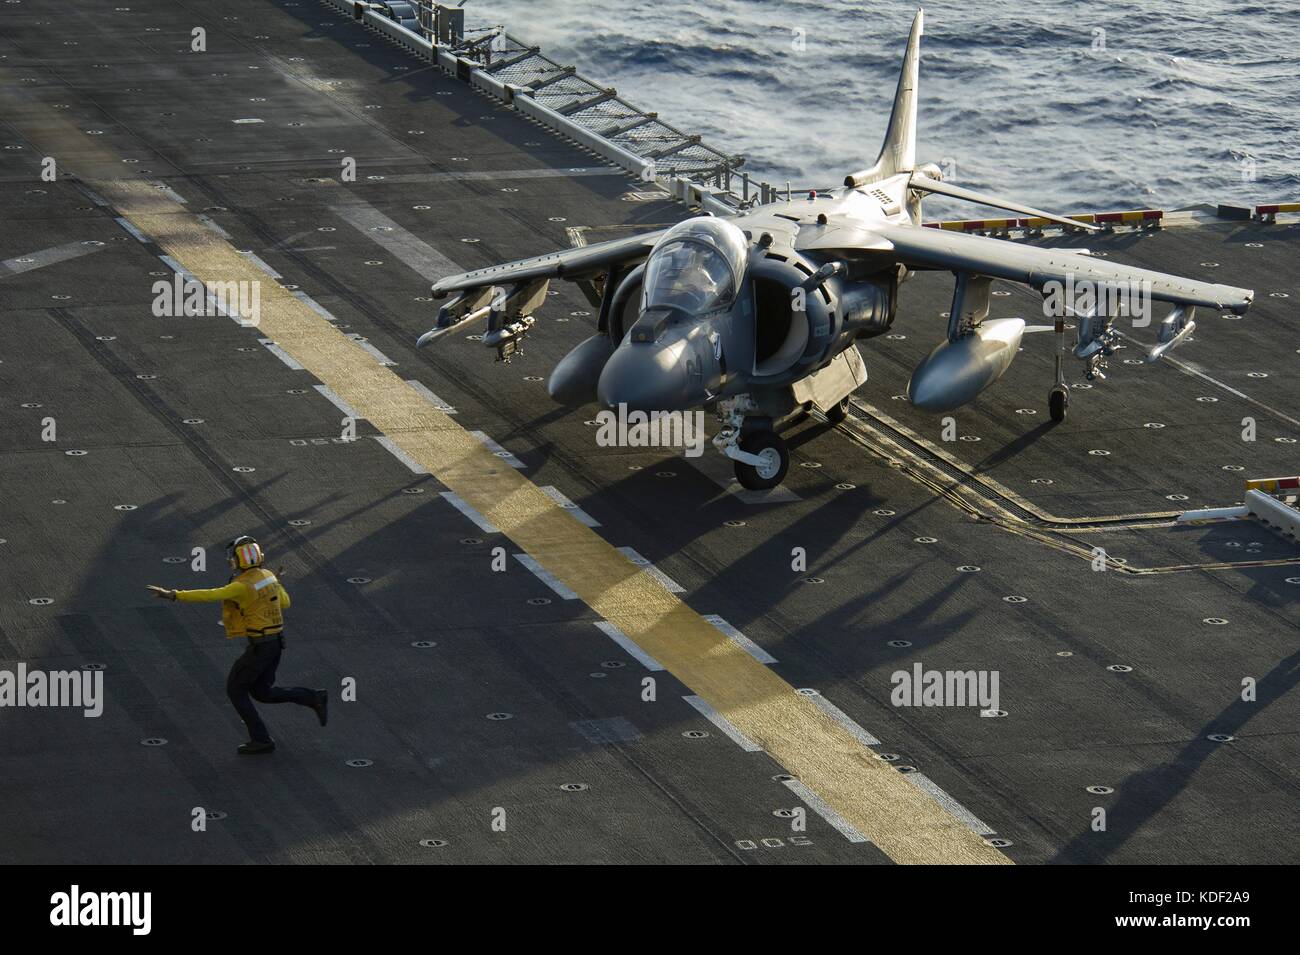 A U.S. sailor directs a U.S. Marine Corps AV-8B Harrier II ground-attack aircraft landing on the flight deck aboard the U.S. Navy America-class amphibious assault ship USS America July 16, 2017 in the Pacific Ocean.   (photo by Ramon Go  via Planetpix) Stock Photo